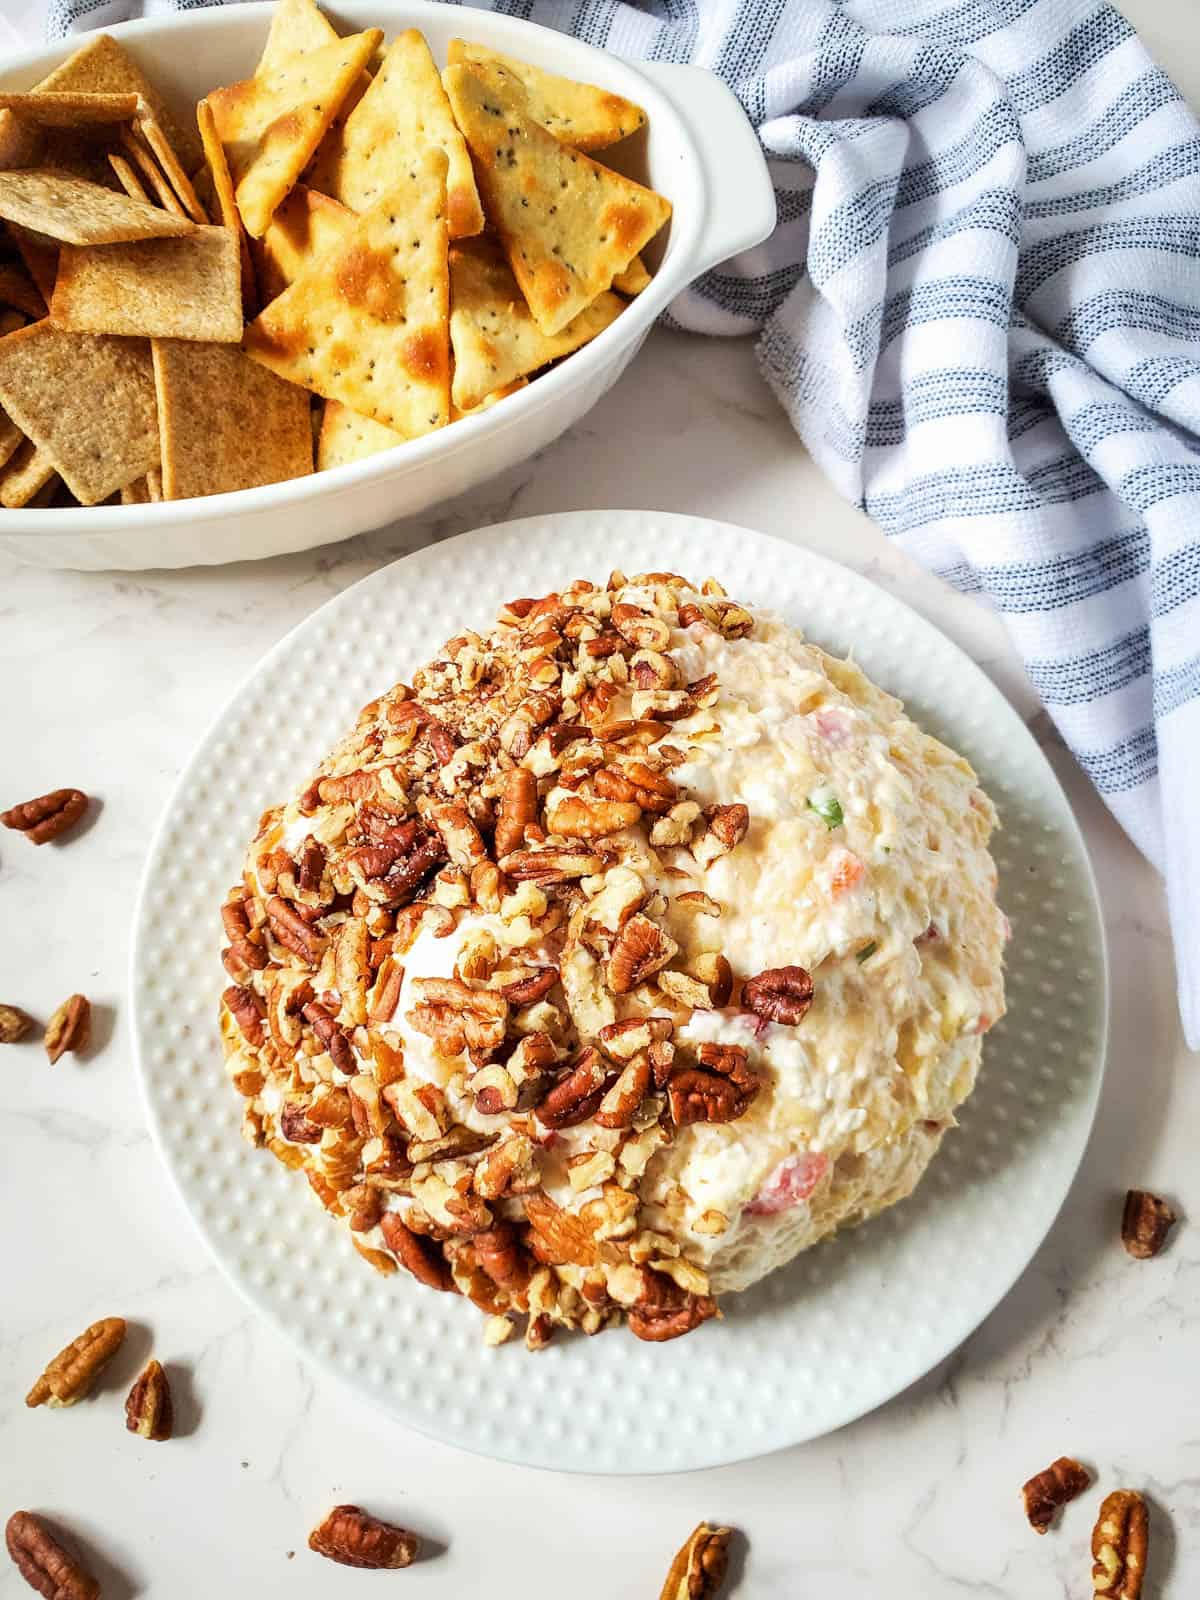 A pineapple cheese ball half coated with pecan nuts on a serving platter with crackers on the side.